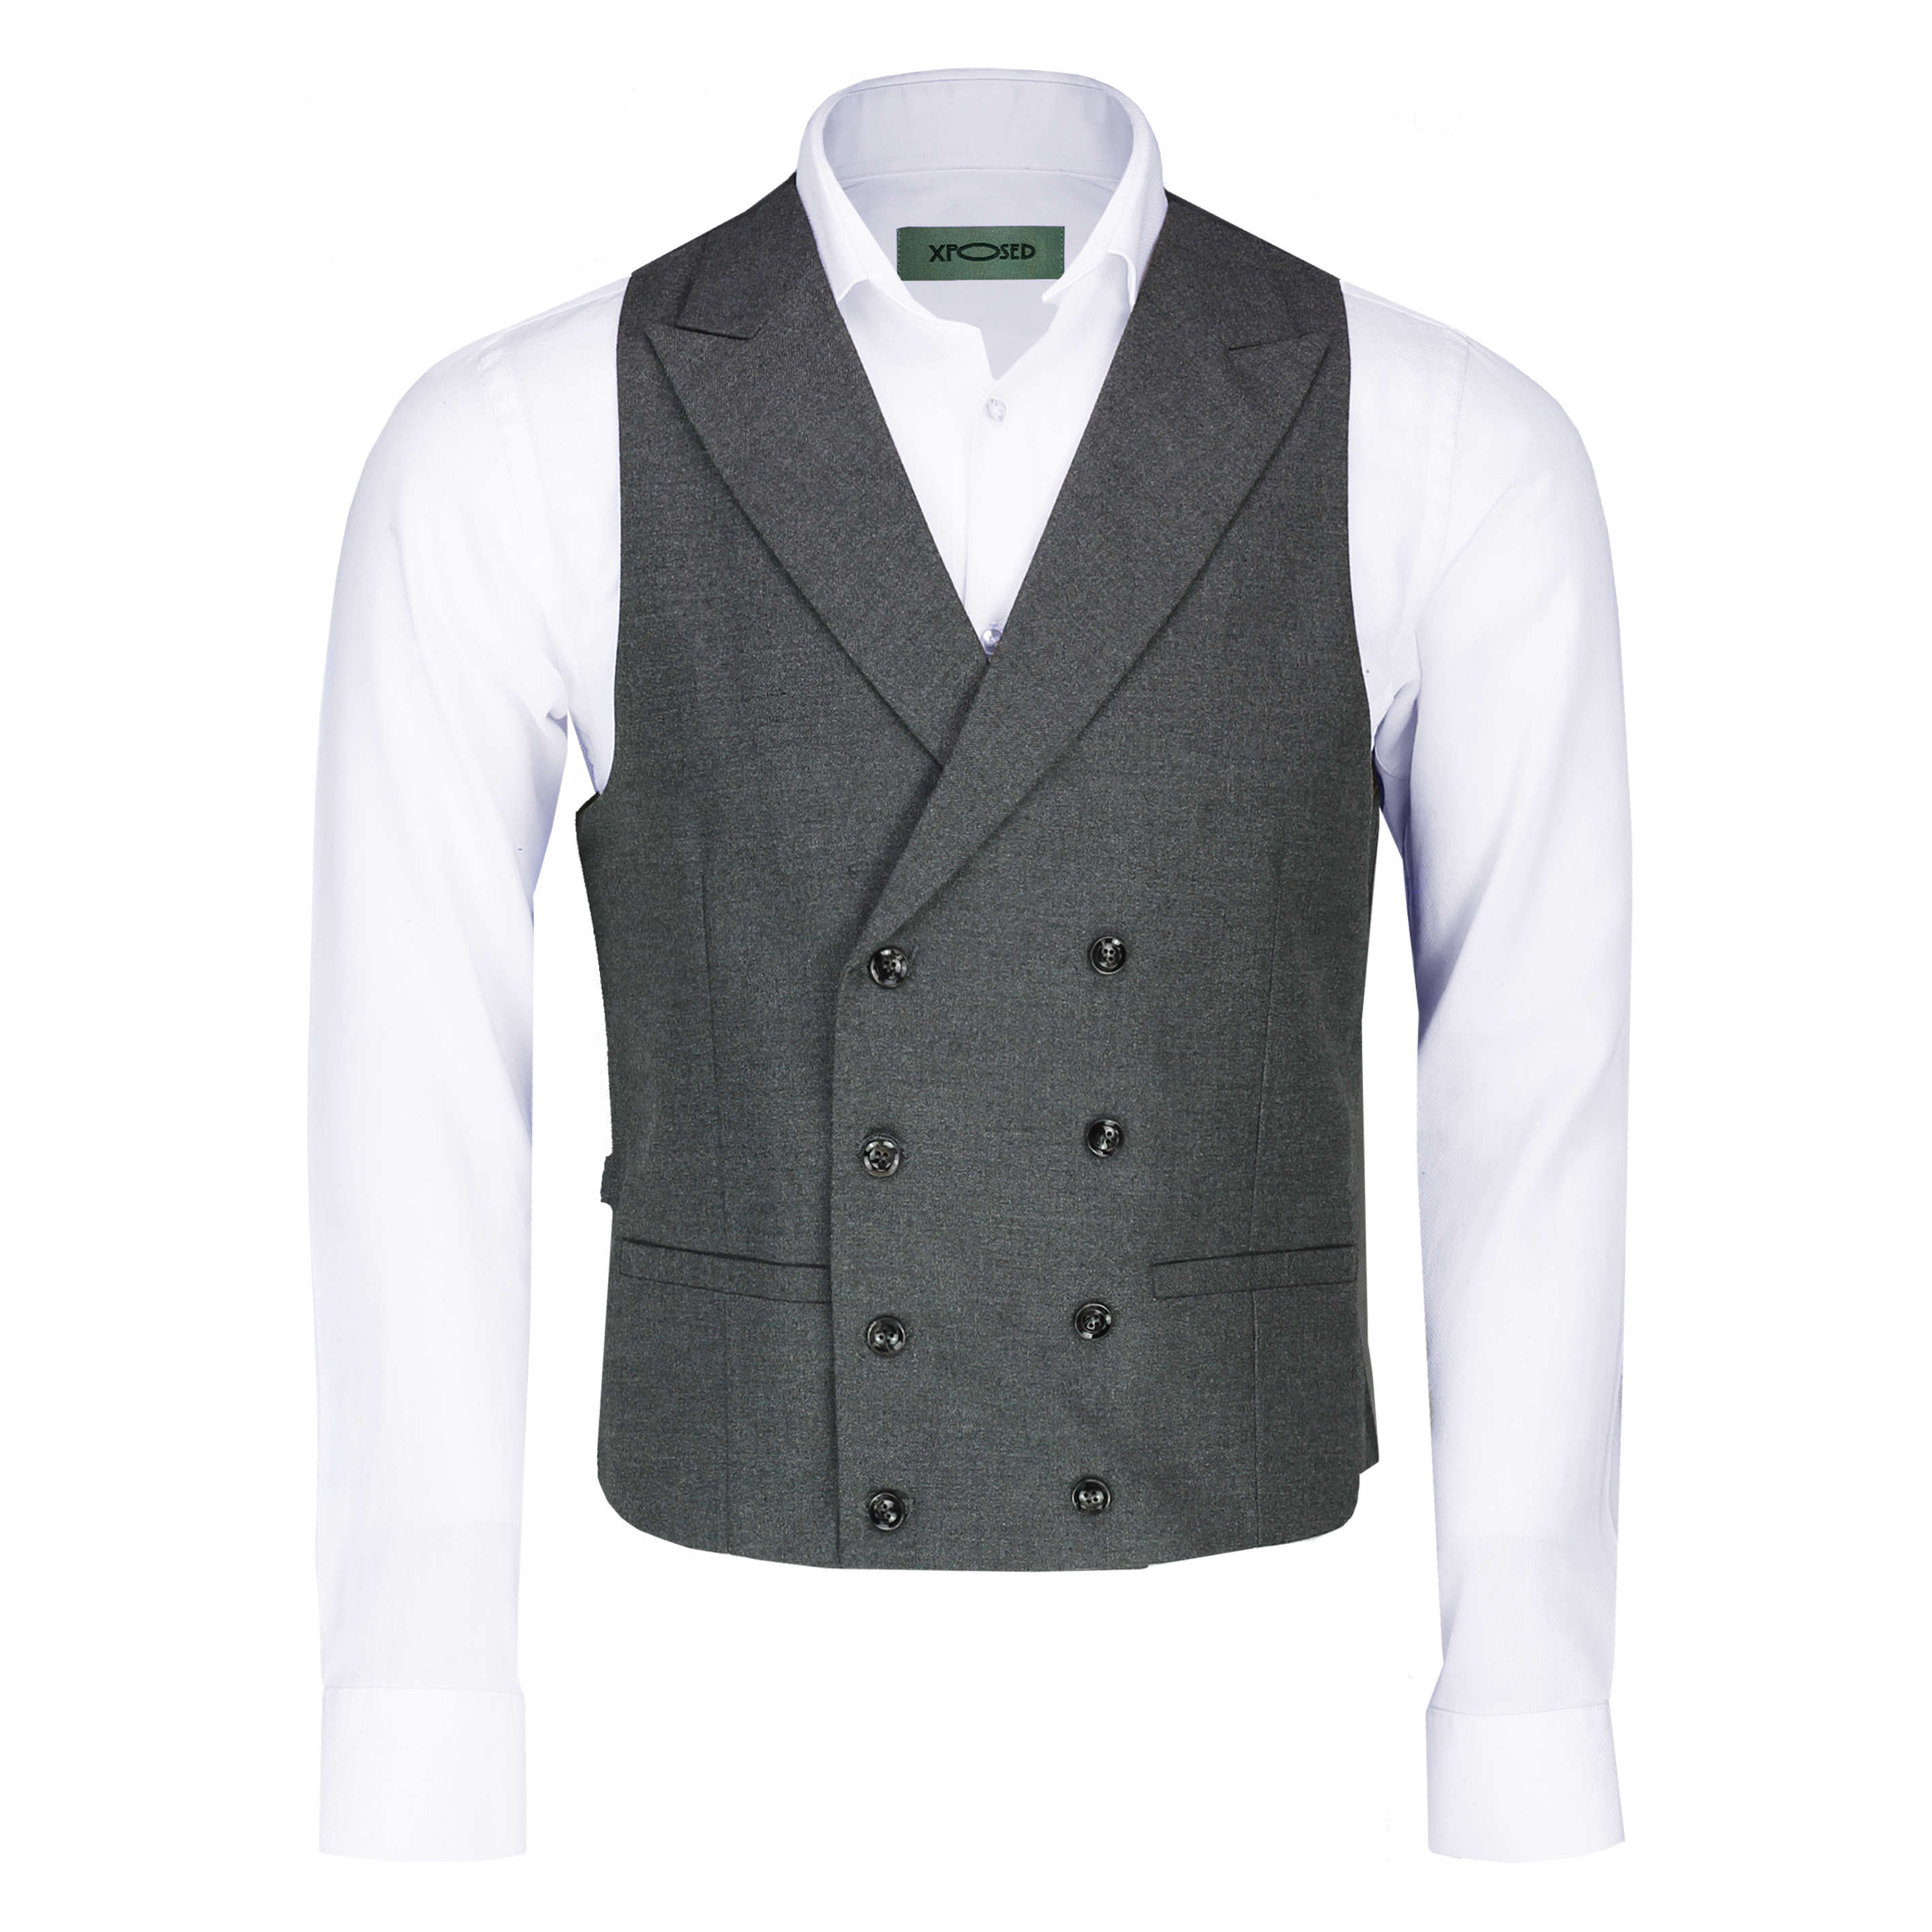 Xposed Mens Classic Peak Lapel Double Breasted Waistcoat Trouser Smart Retro Tailored Fit Items Sold Separately